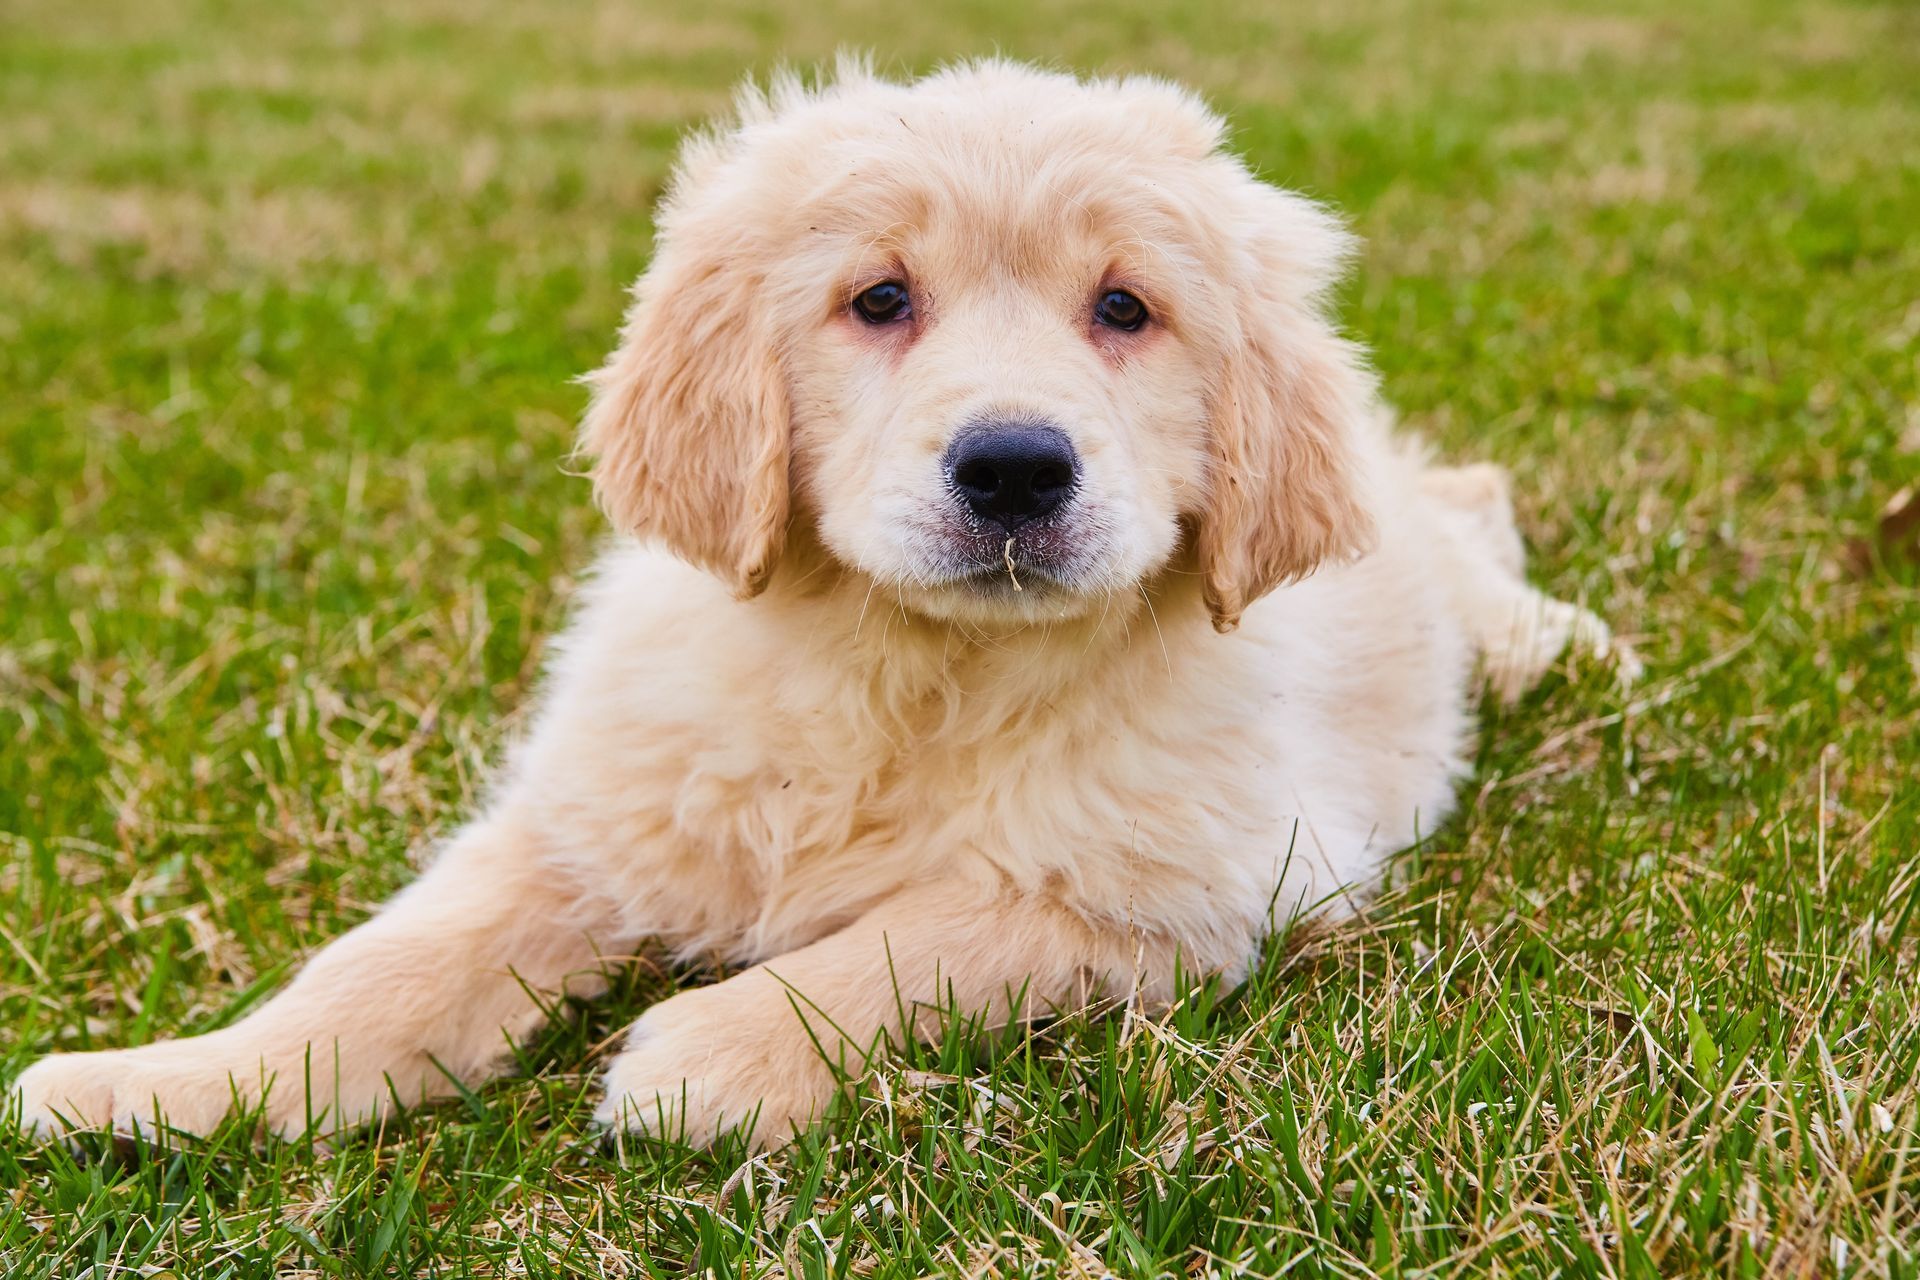 Indiana Goldendoodle puppy